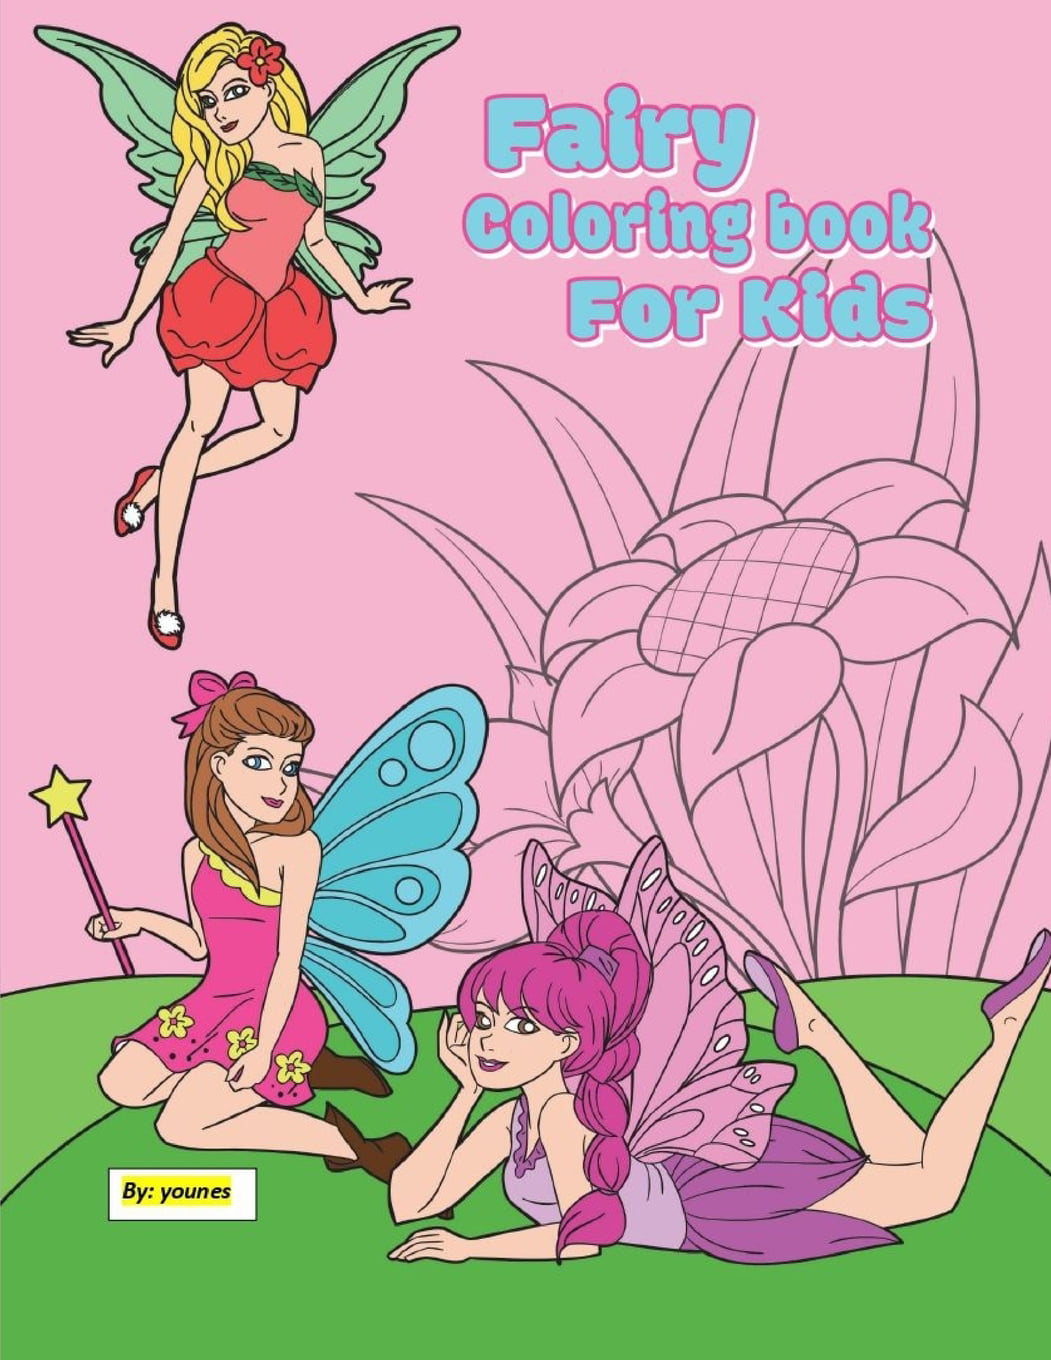 Download Part One Fairy Coloring Book For Kids 30 Pages Suitable For Children Between The Ages Of 2 8 Series 1 Paperback Walmart Com Walmart Com